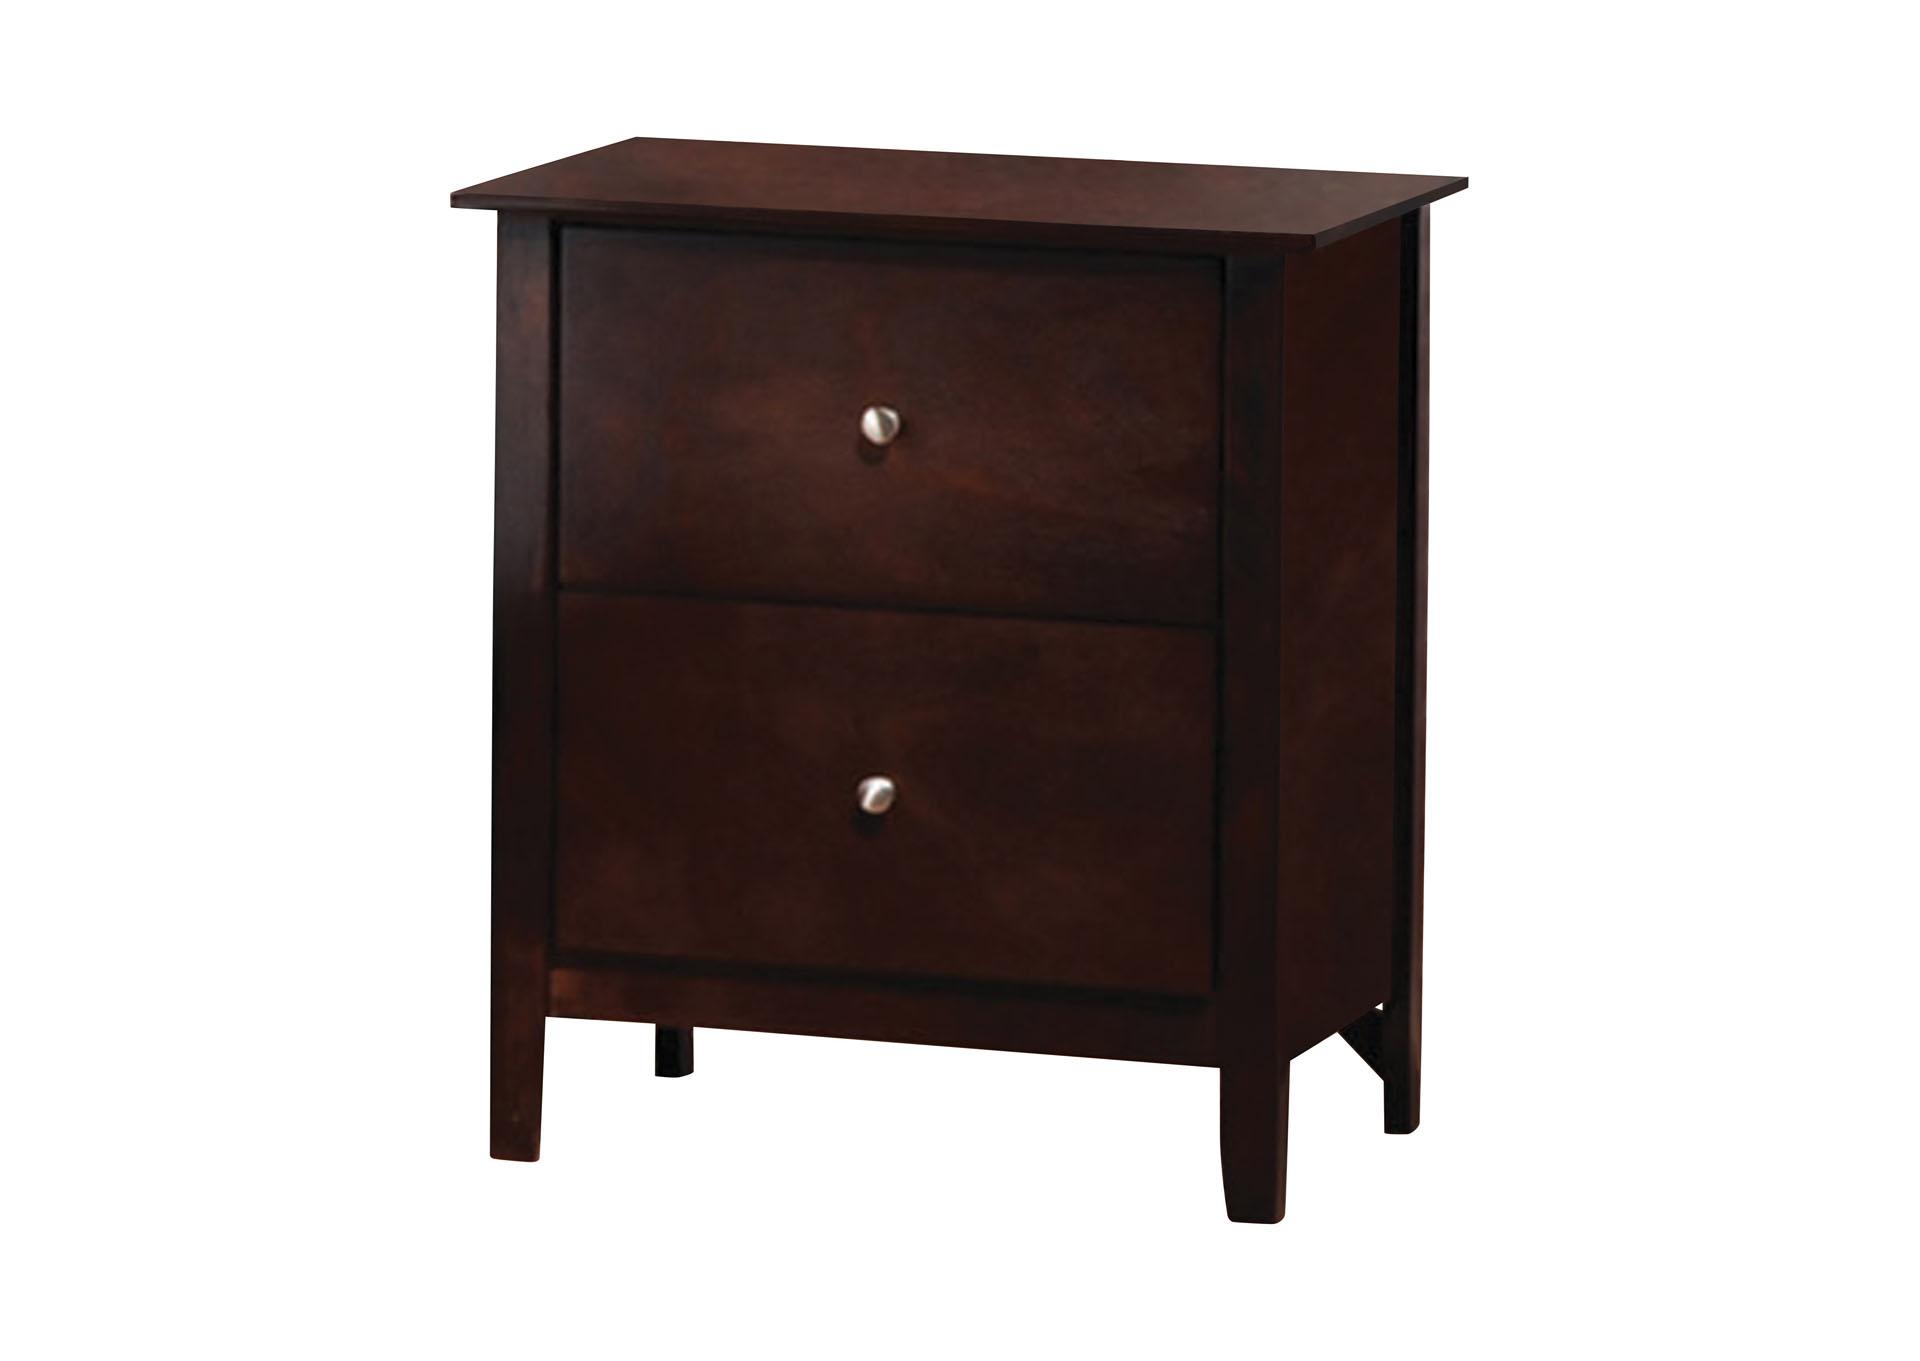 Coffee Bean Tia Cappuccino Two-Drawer Nightstand,InStore Products